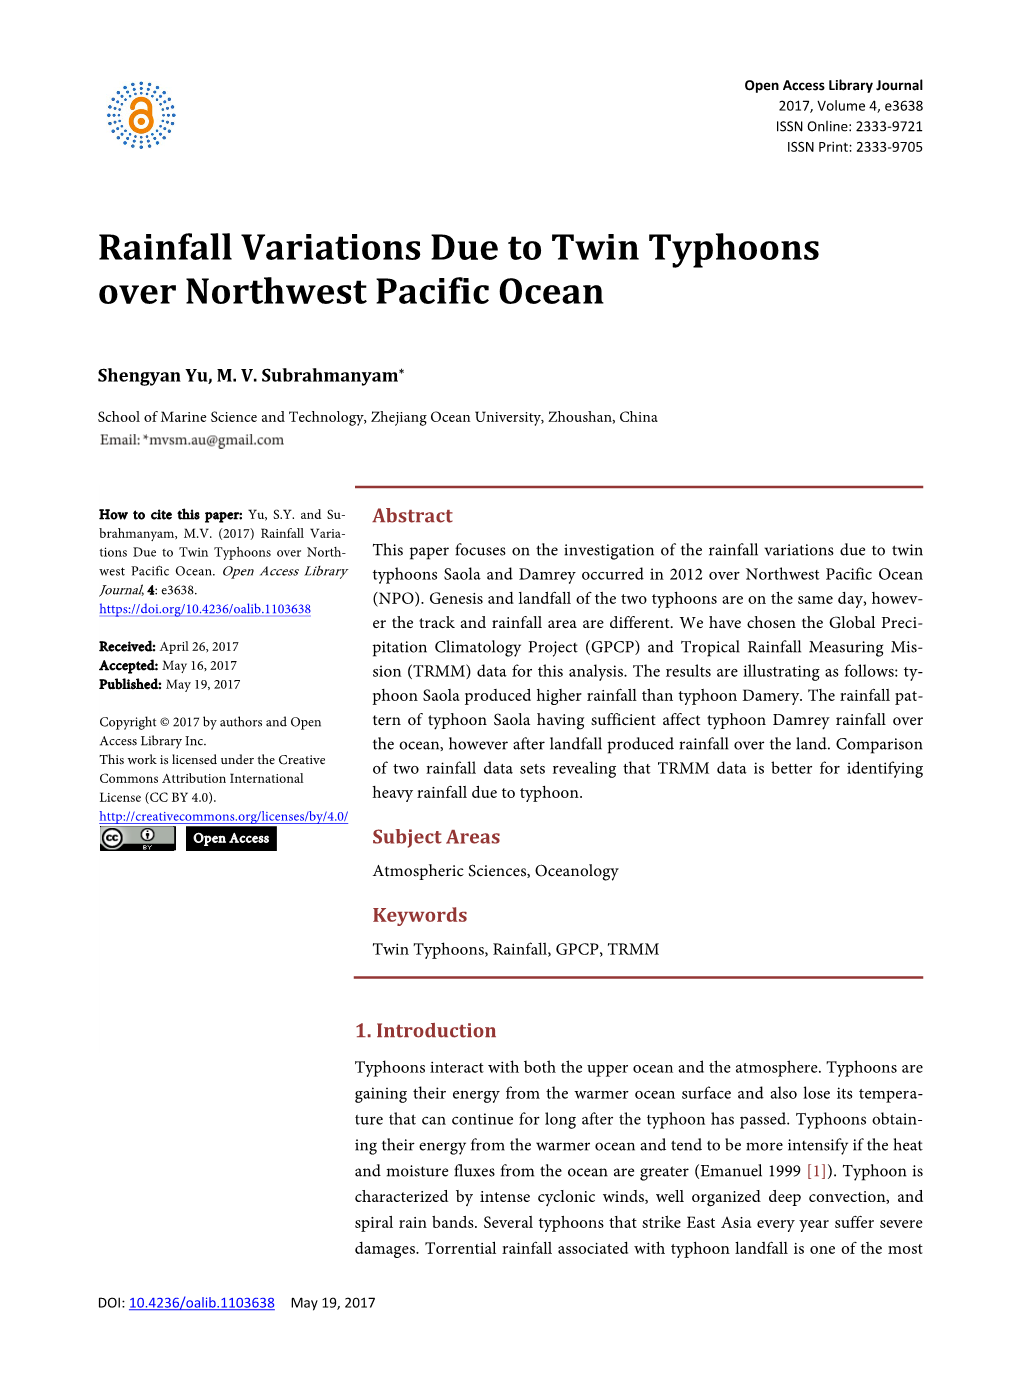 Rainfall Variations Due to Twin Typhoons Over Northwest Pacific Ocean